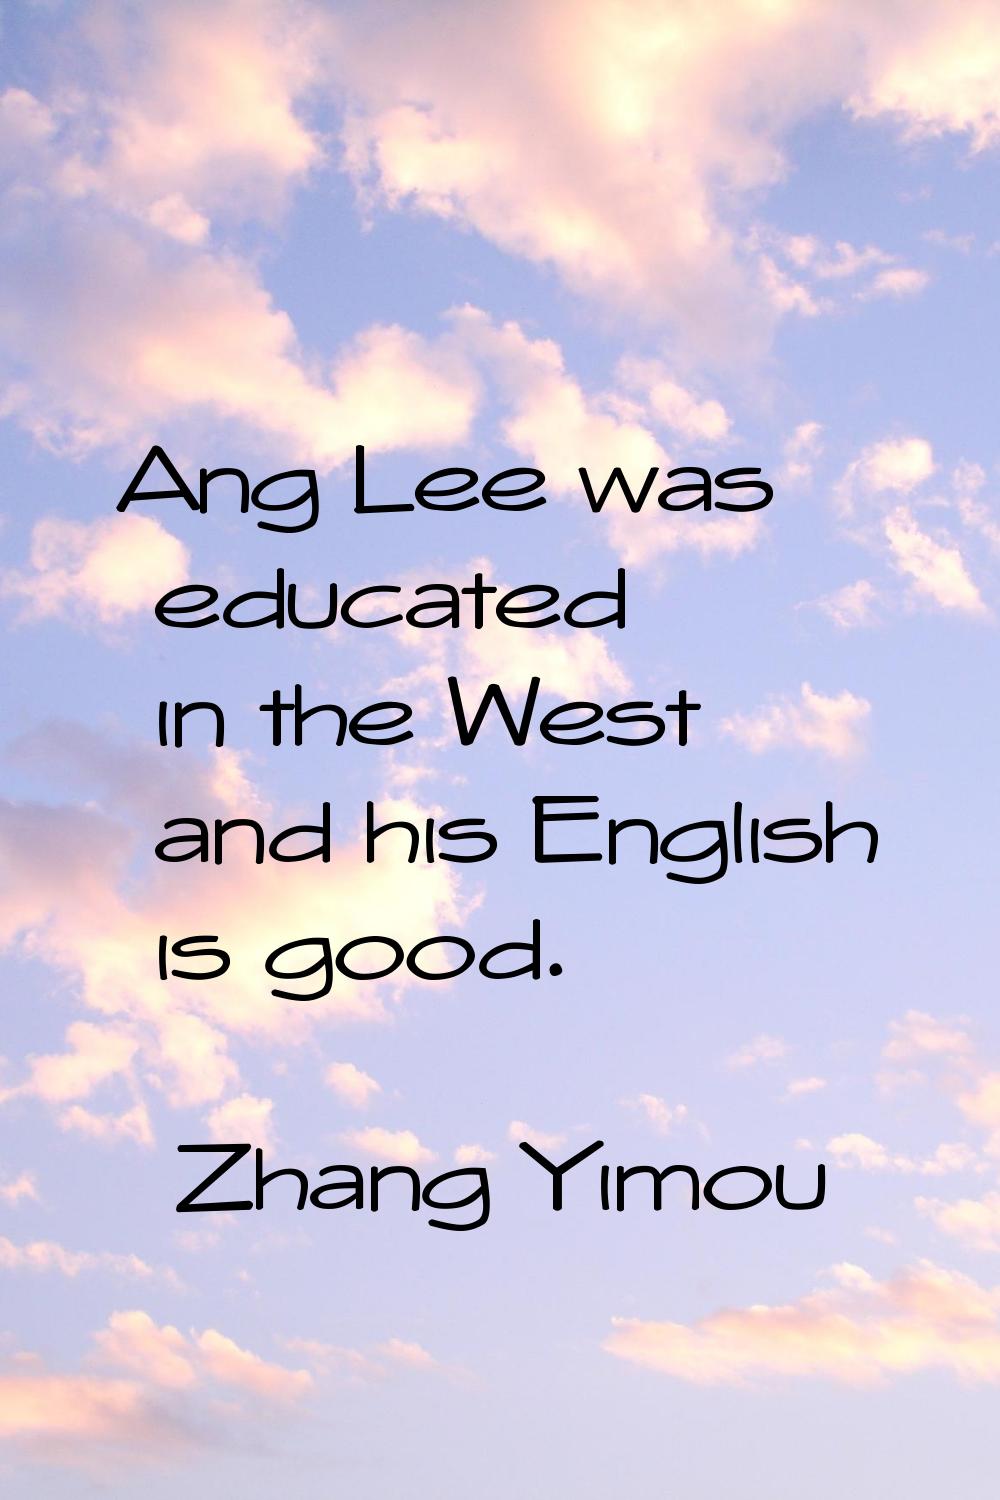 Ang Lee was educated in the West and his English is good.